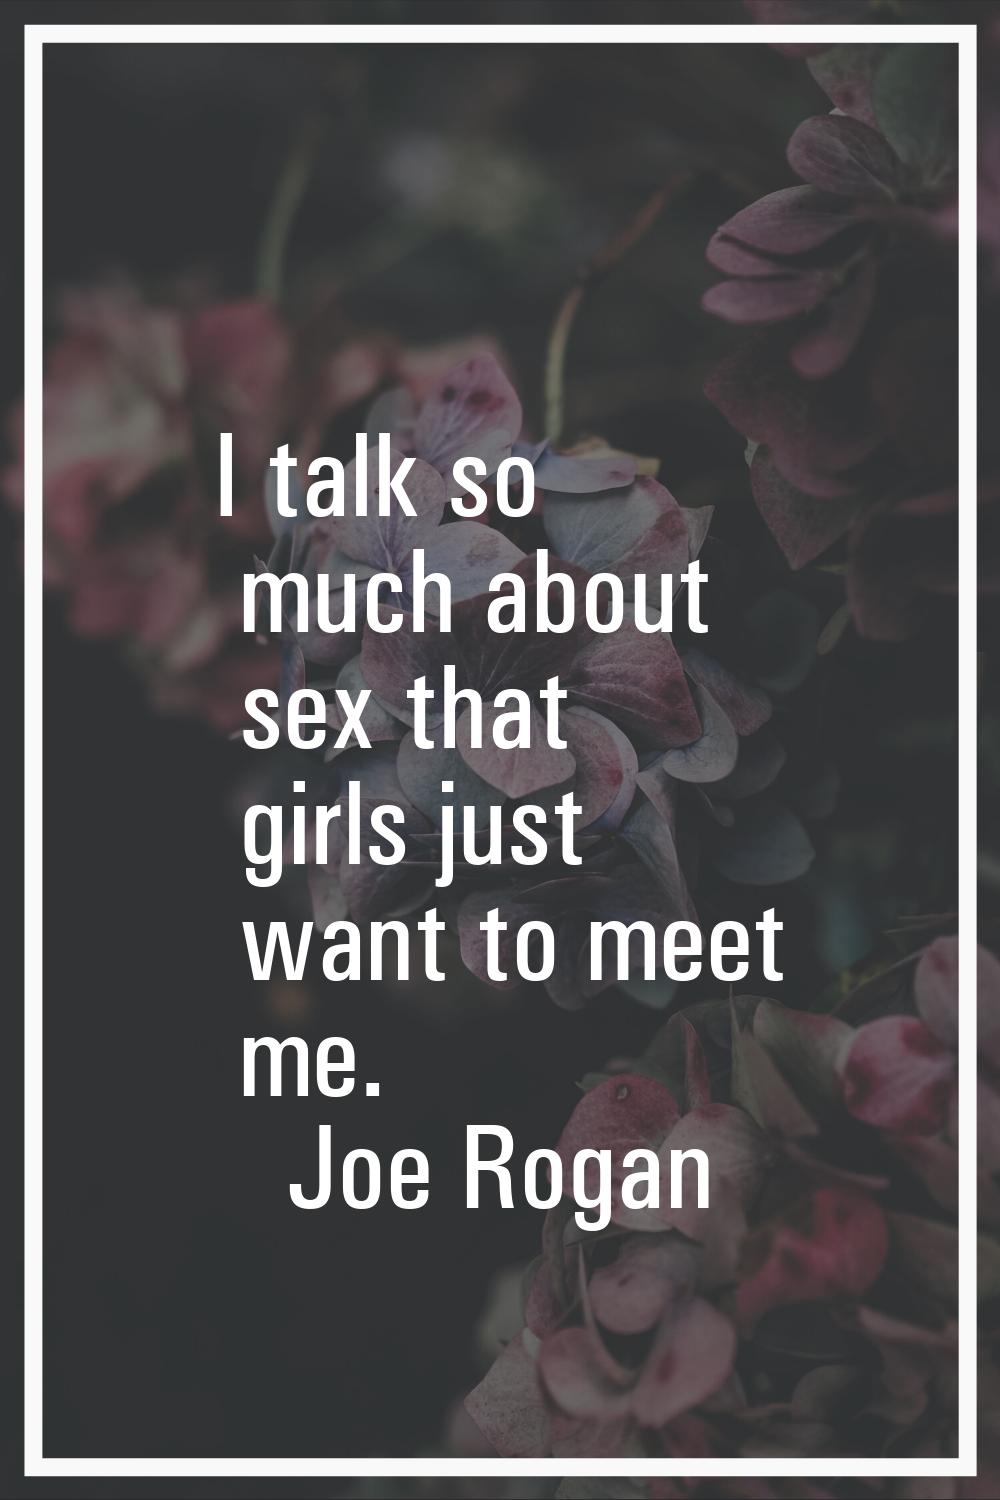 I talk so much about sex that girls just want to meet me.